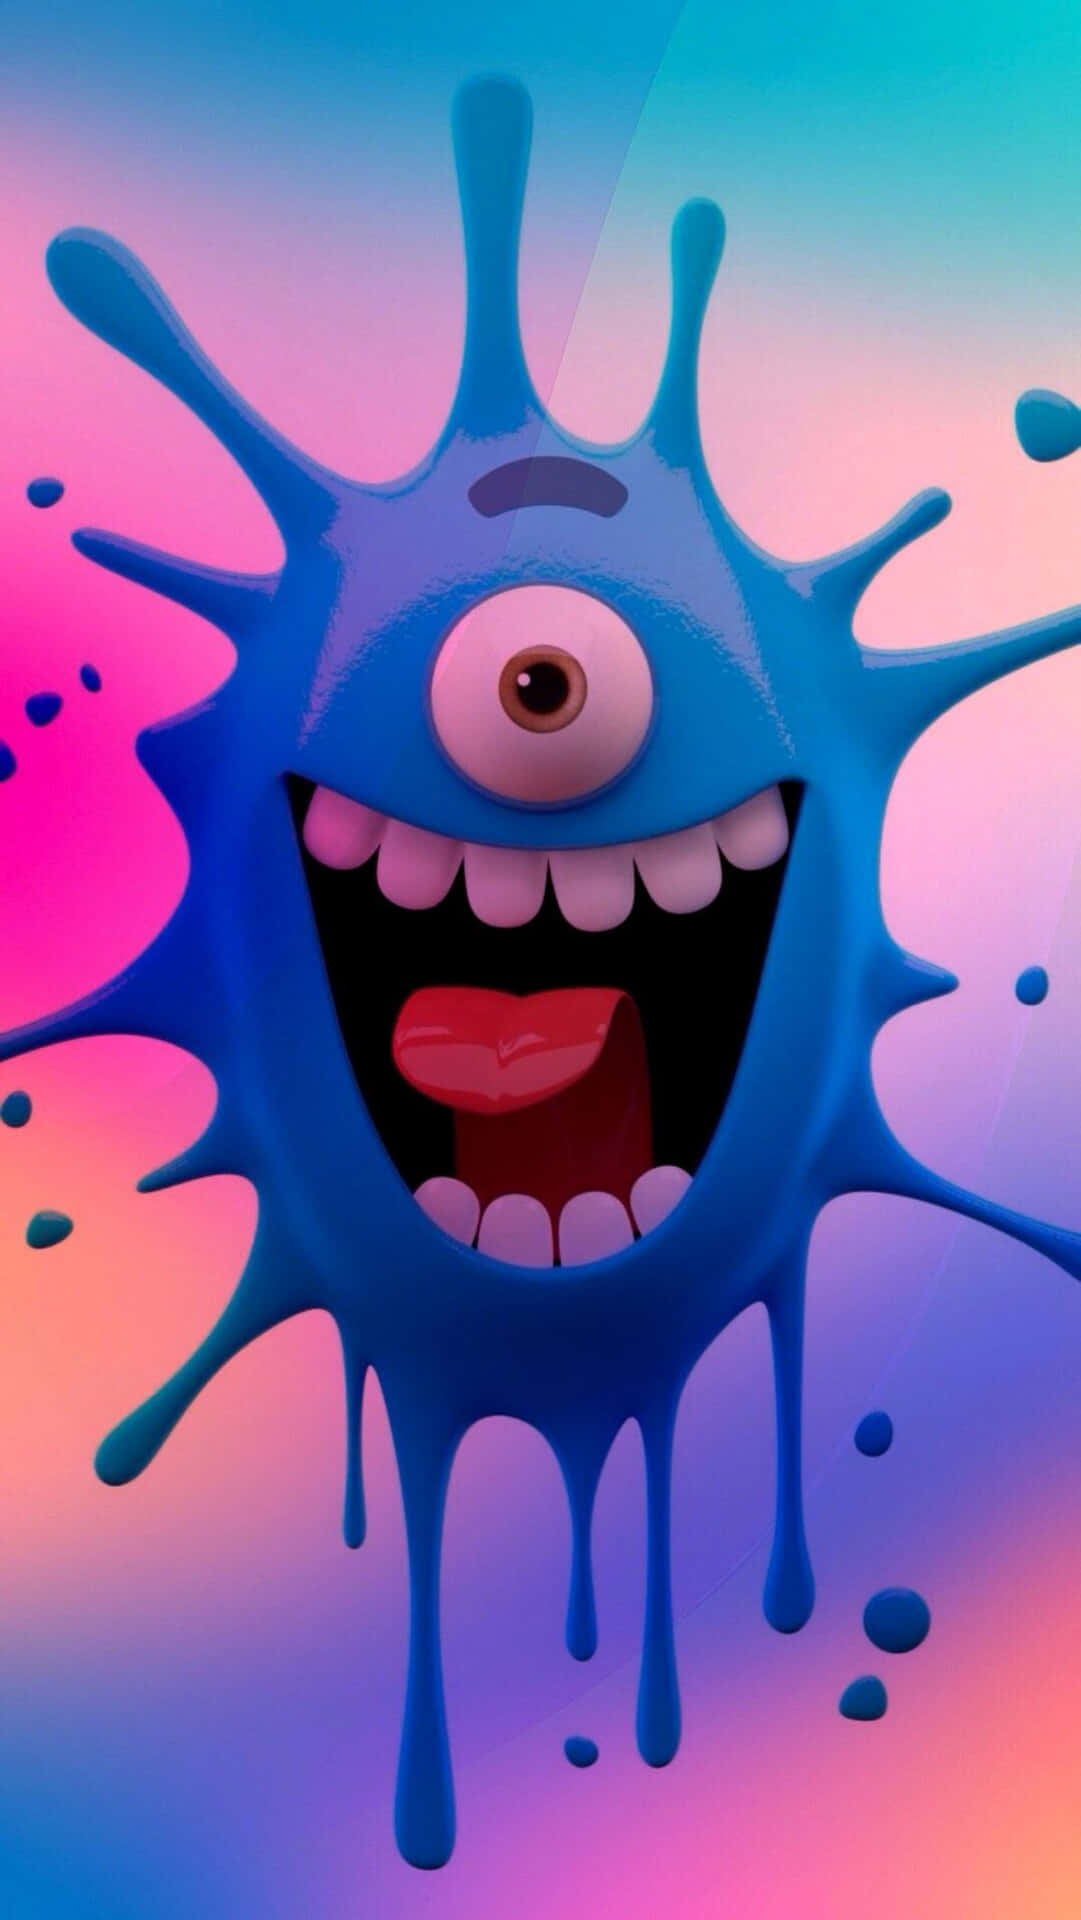 A Cartoon Monster With A Colorful Face Wallpaper